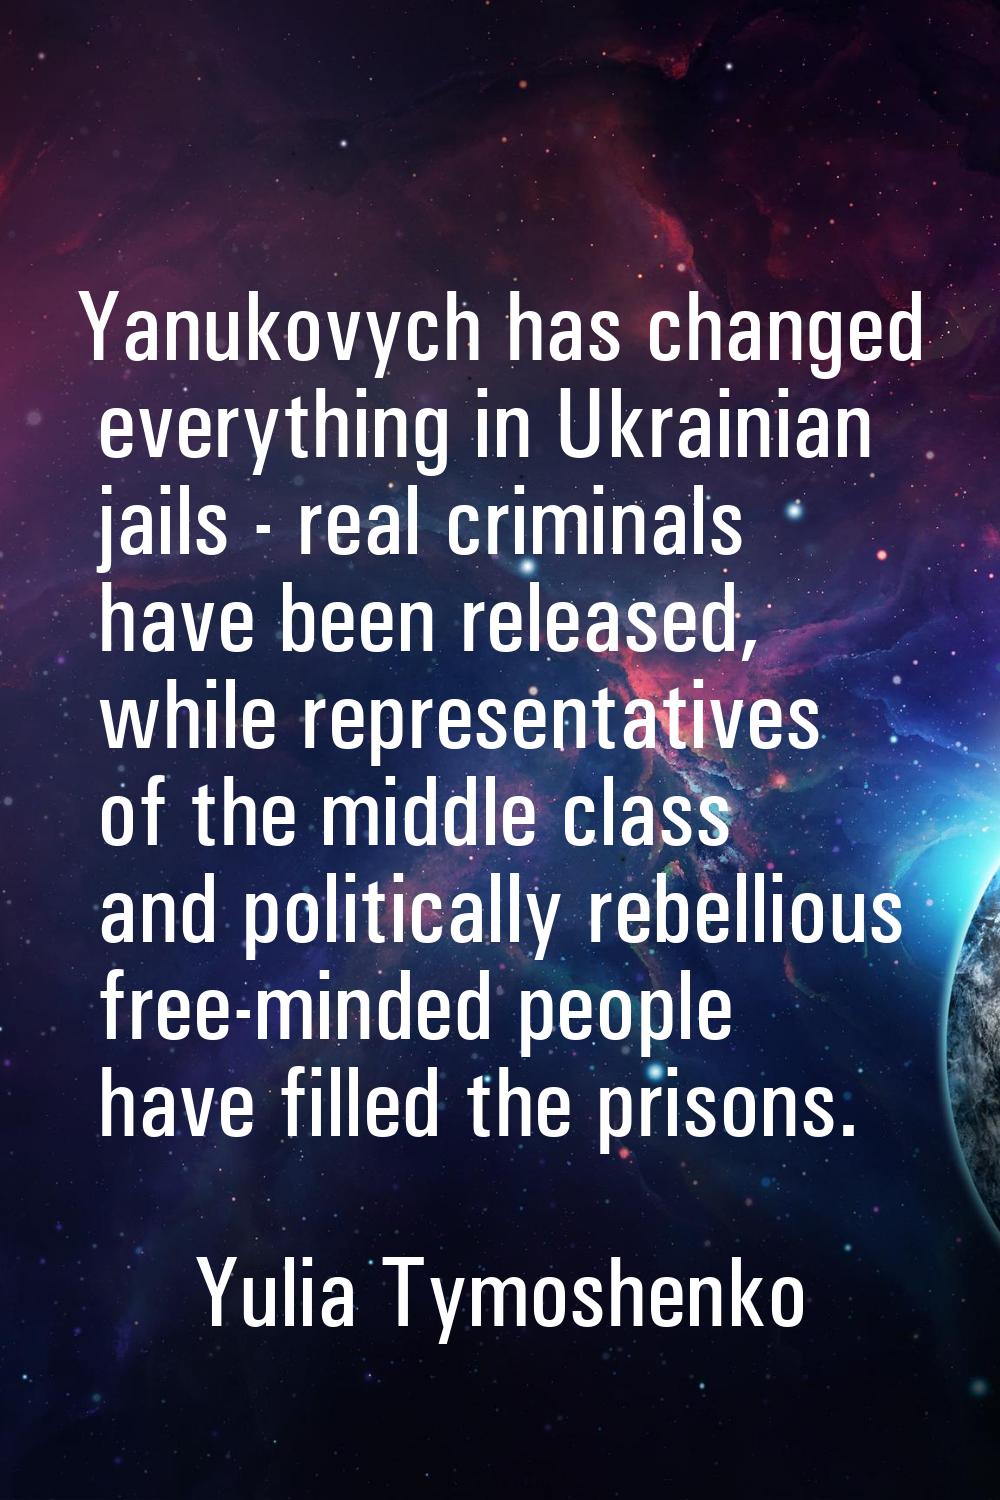 Yanukovych has changed everything in Ukrainian jails - real criminals have been released, while rep